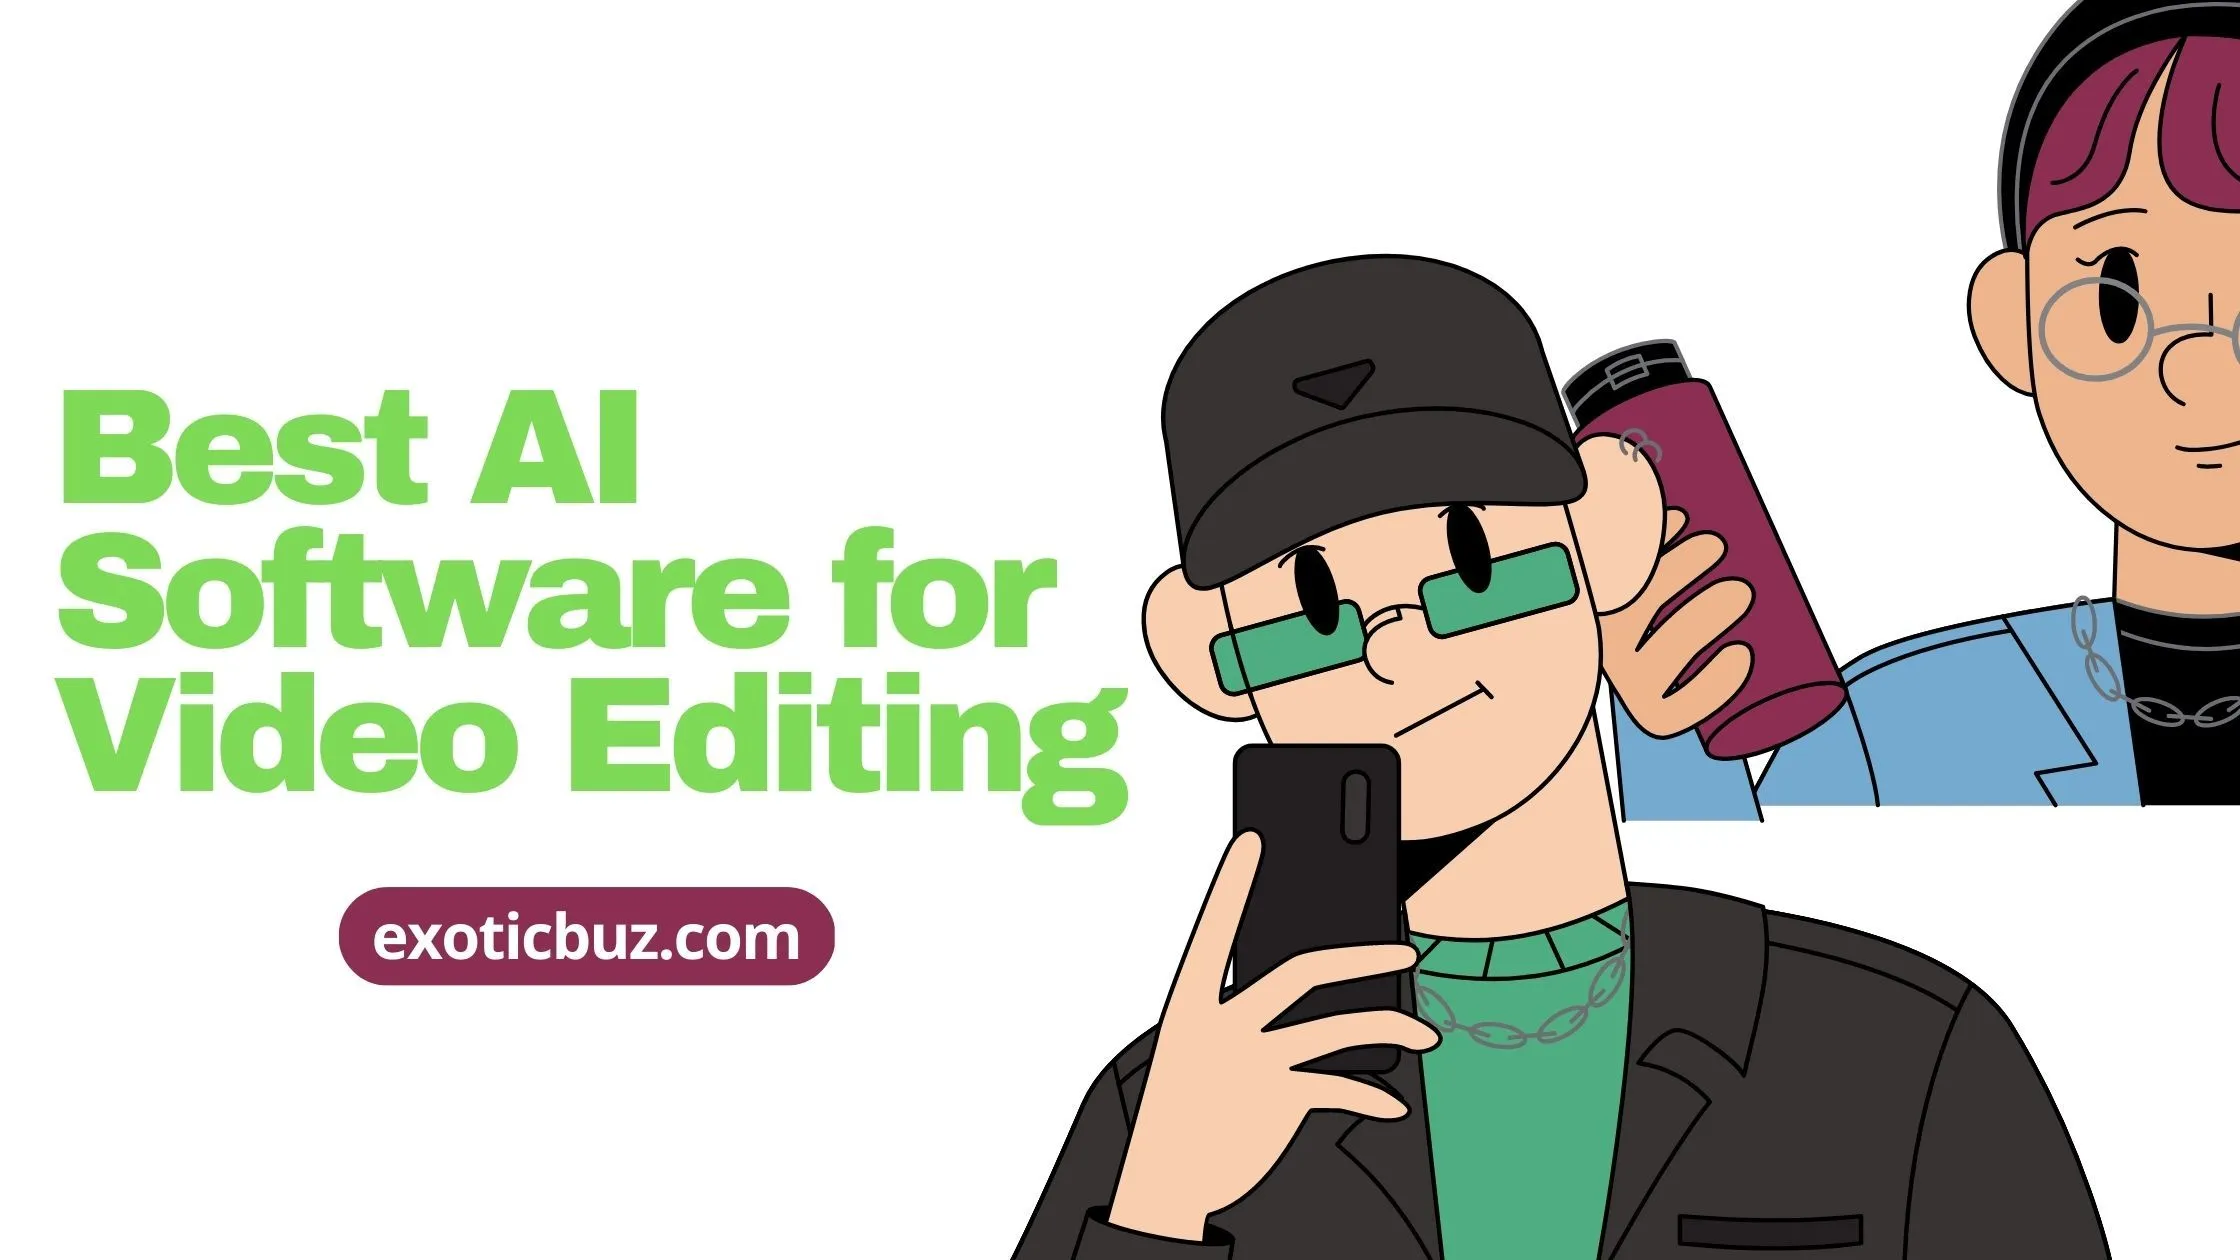 Best AI Software for Video Editing